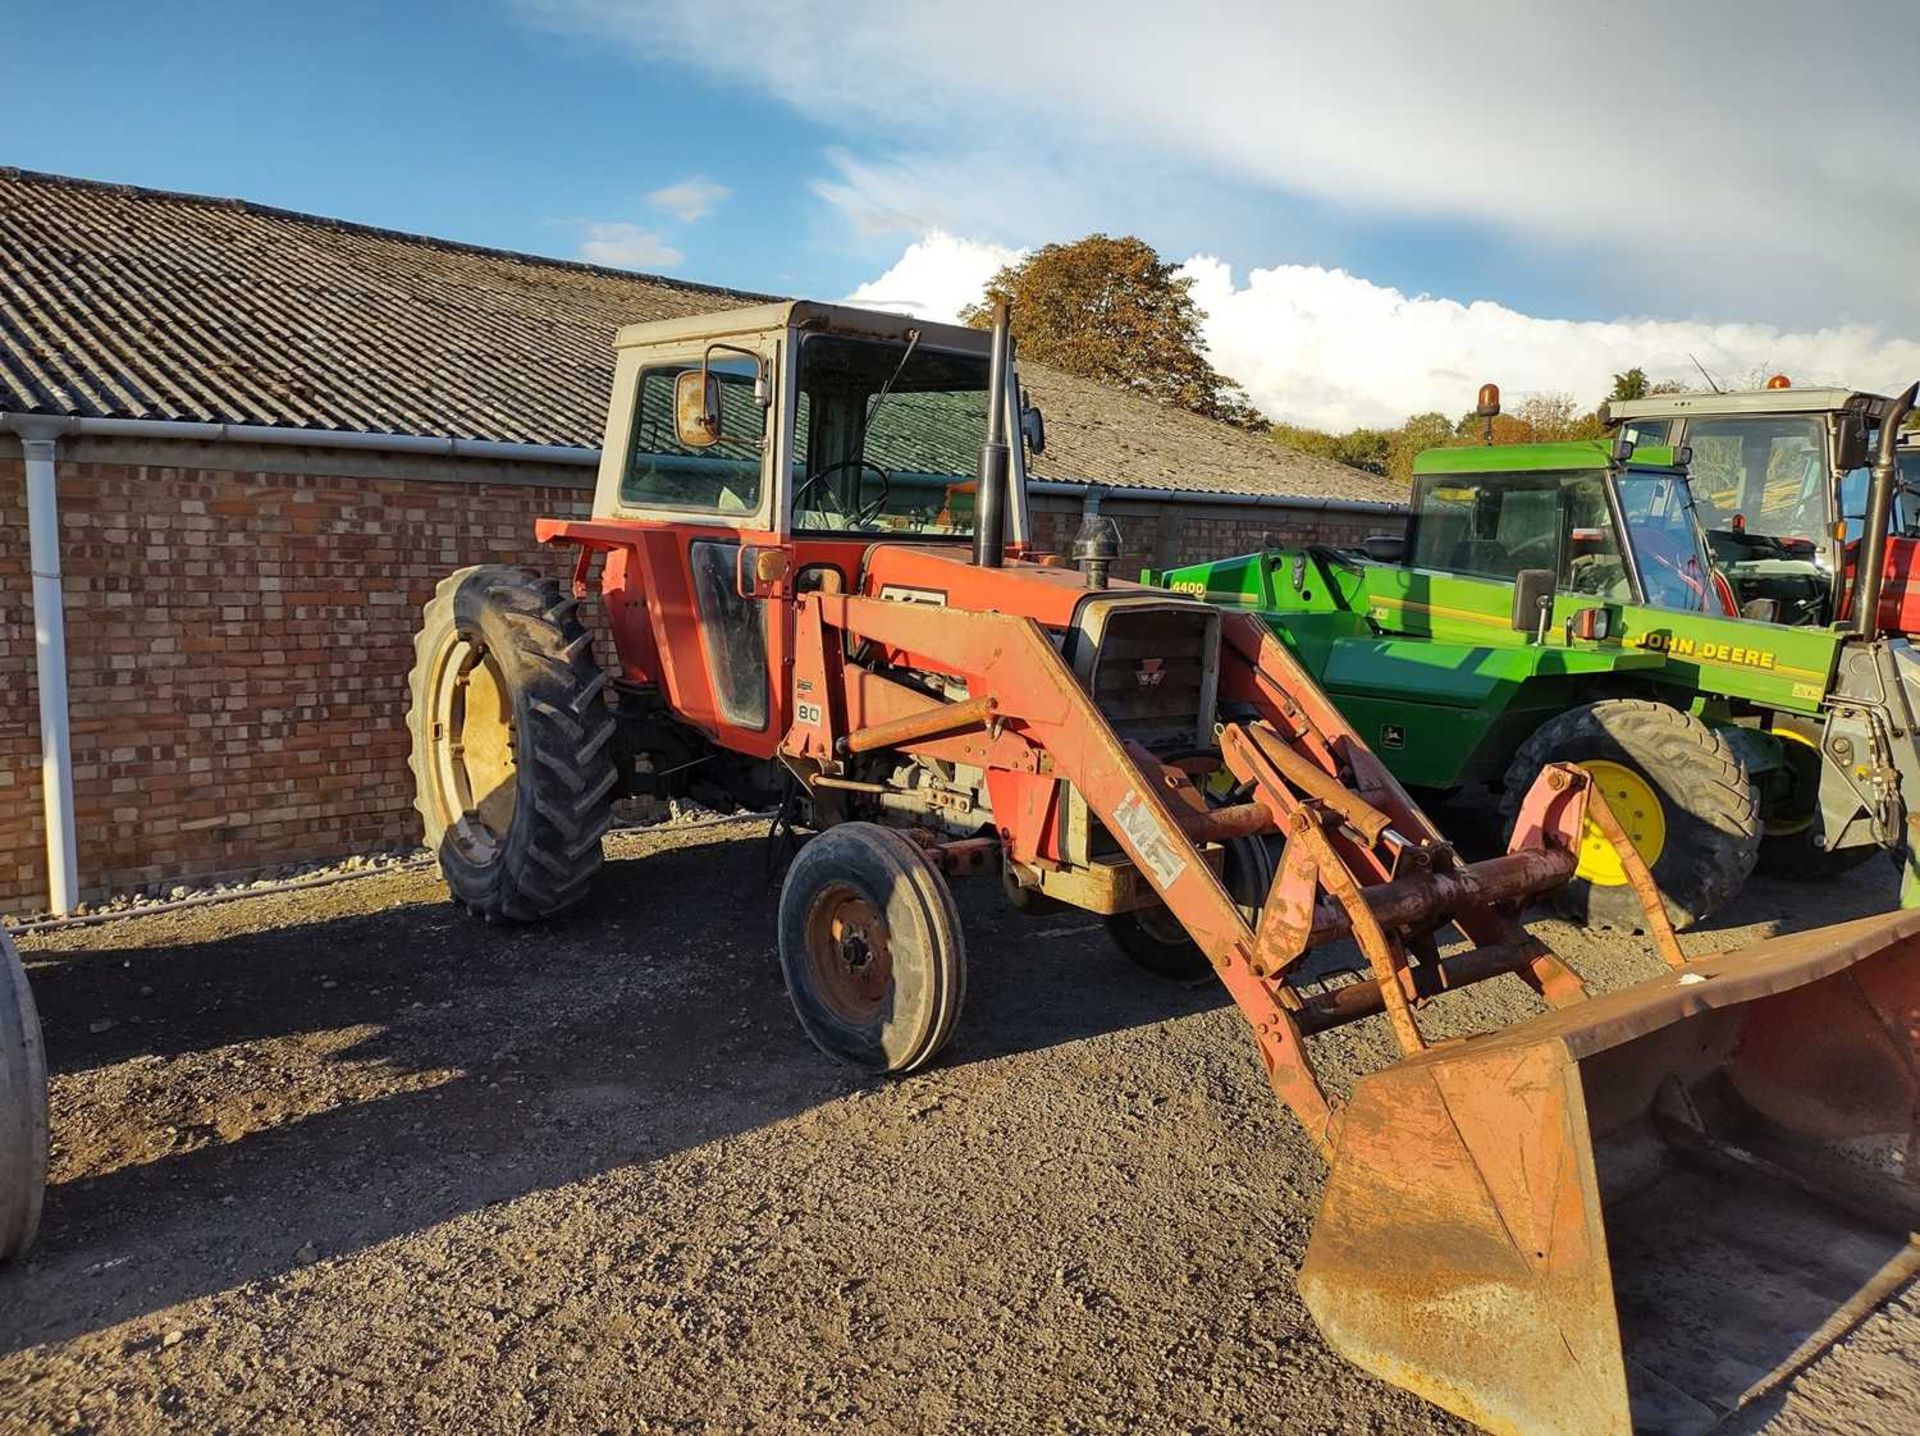 Massey Ferguson 590 Tractor with MF 80 Front Loader & Attachments. 5,573 Hrs. Reg: XVA 740T